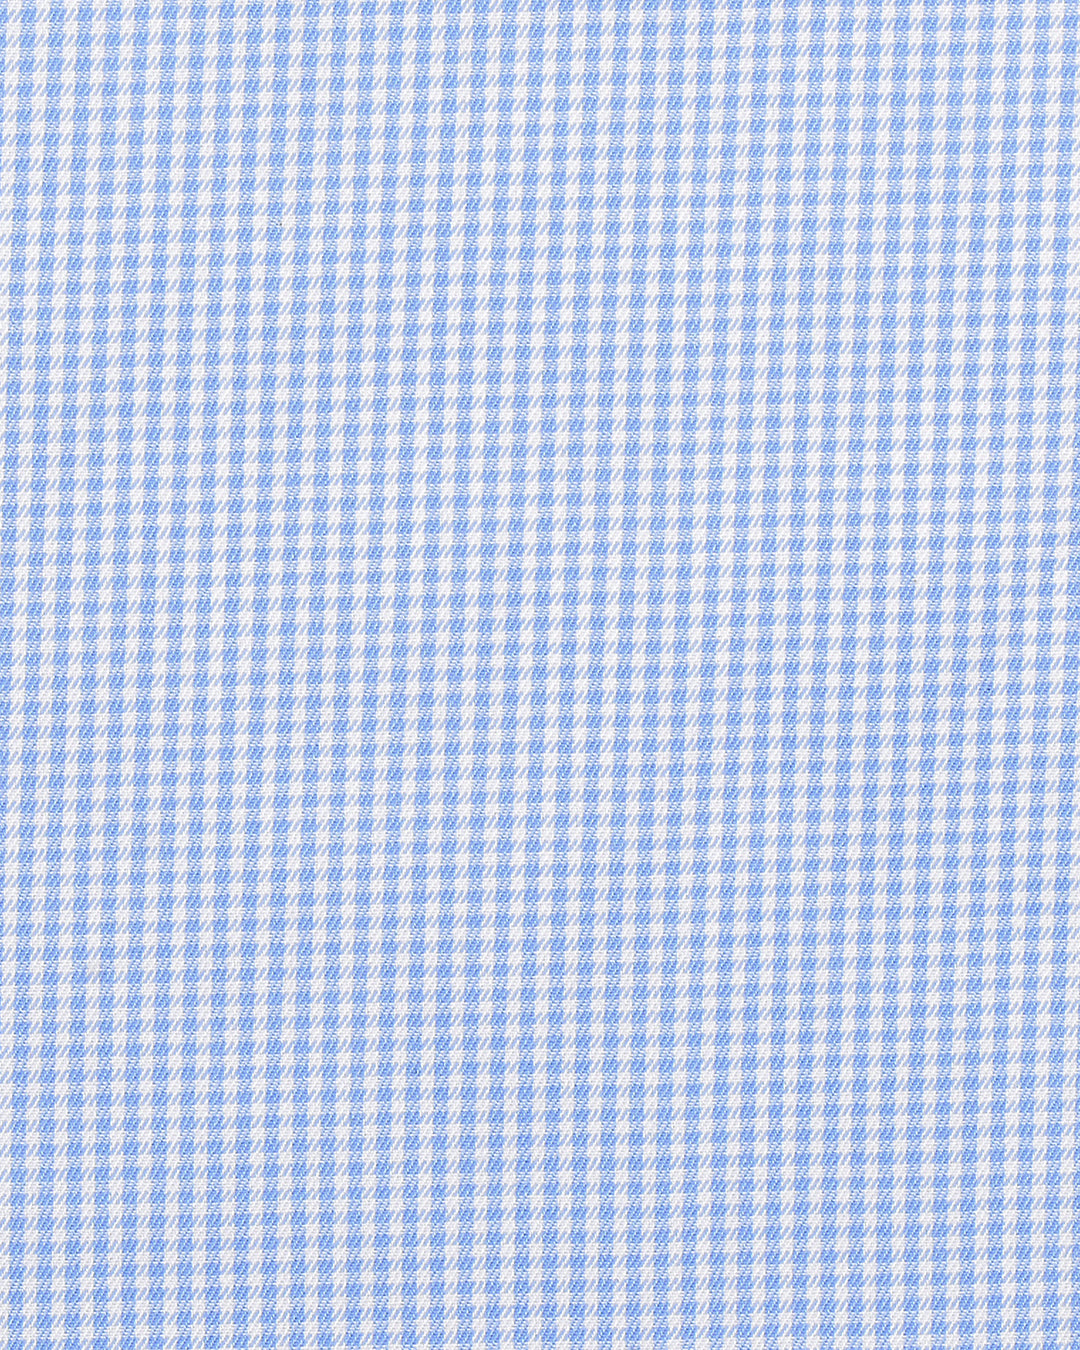 The Finest - Blue Micro Gingham Twill 300/4